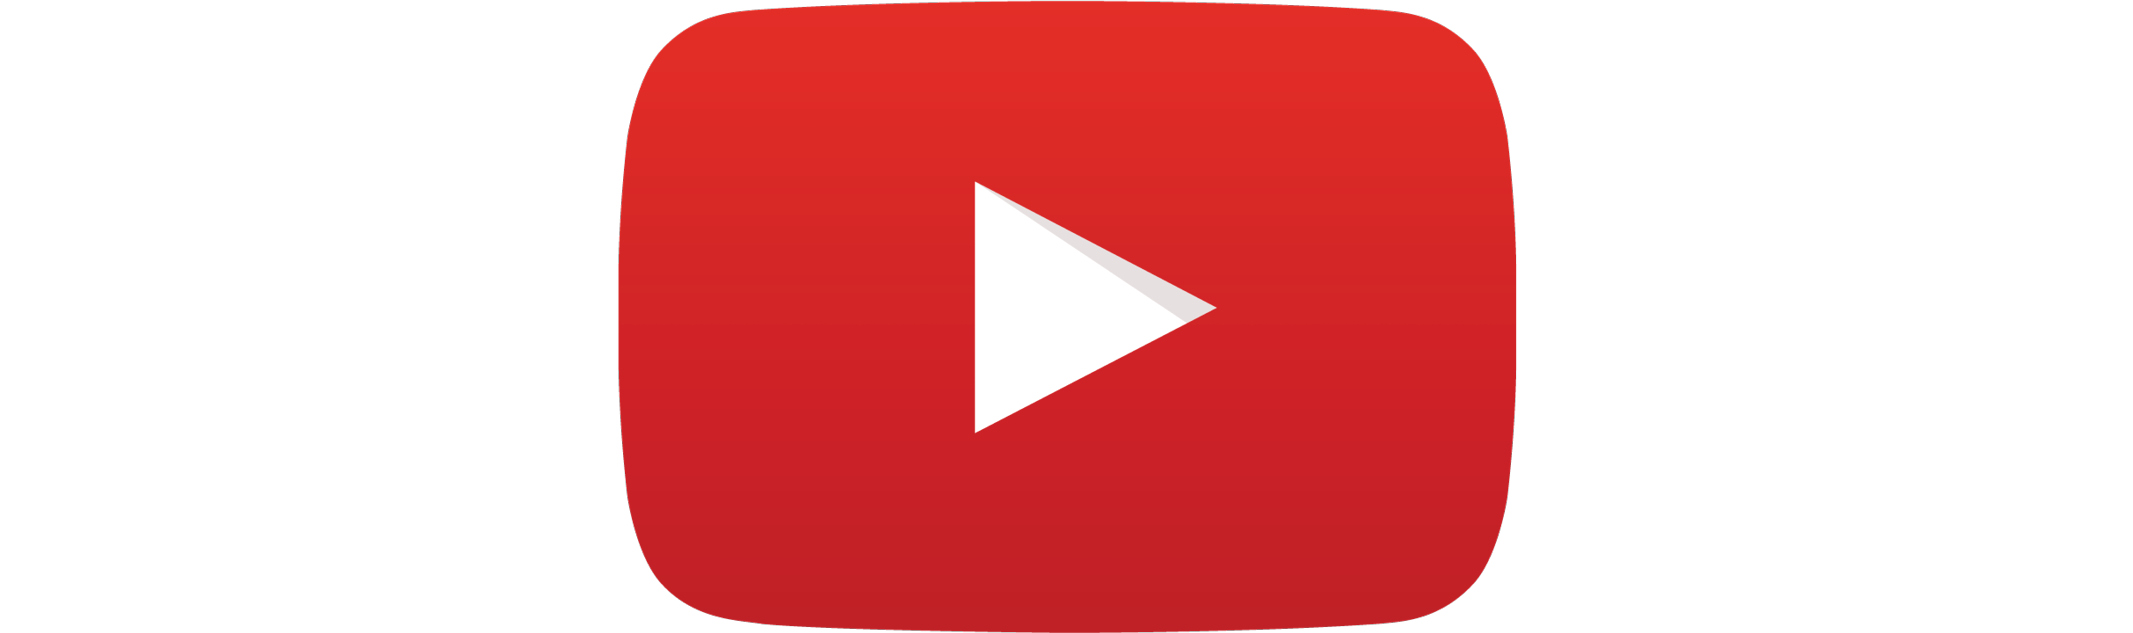 YouTube’s New Concept Gives Users More of What They Want